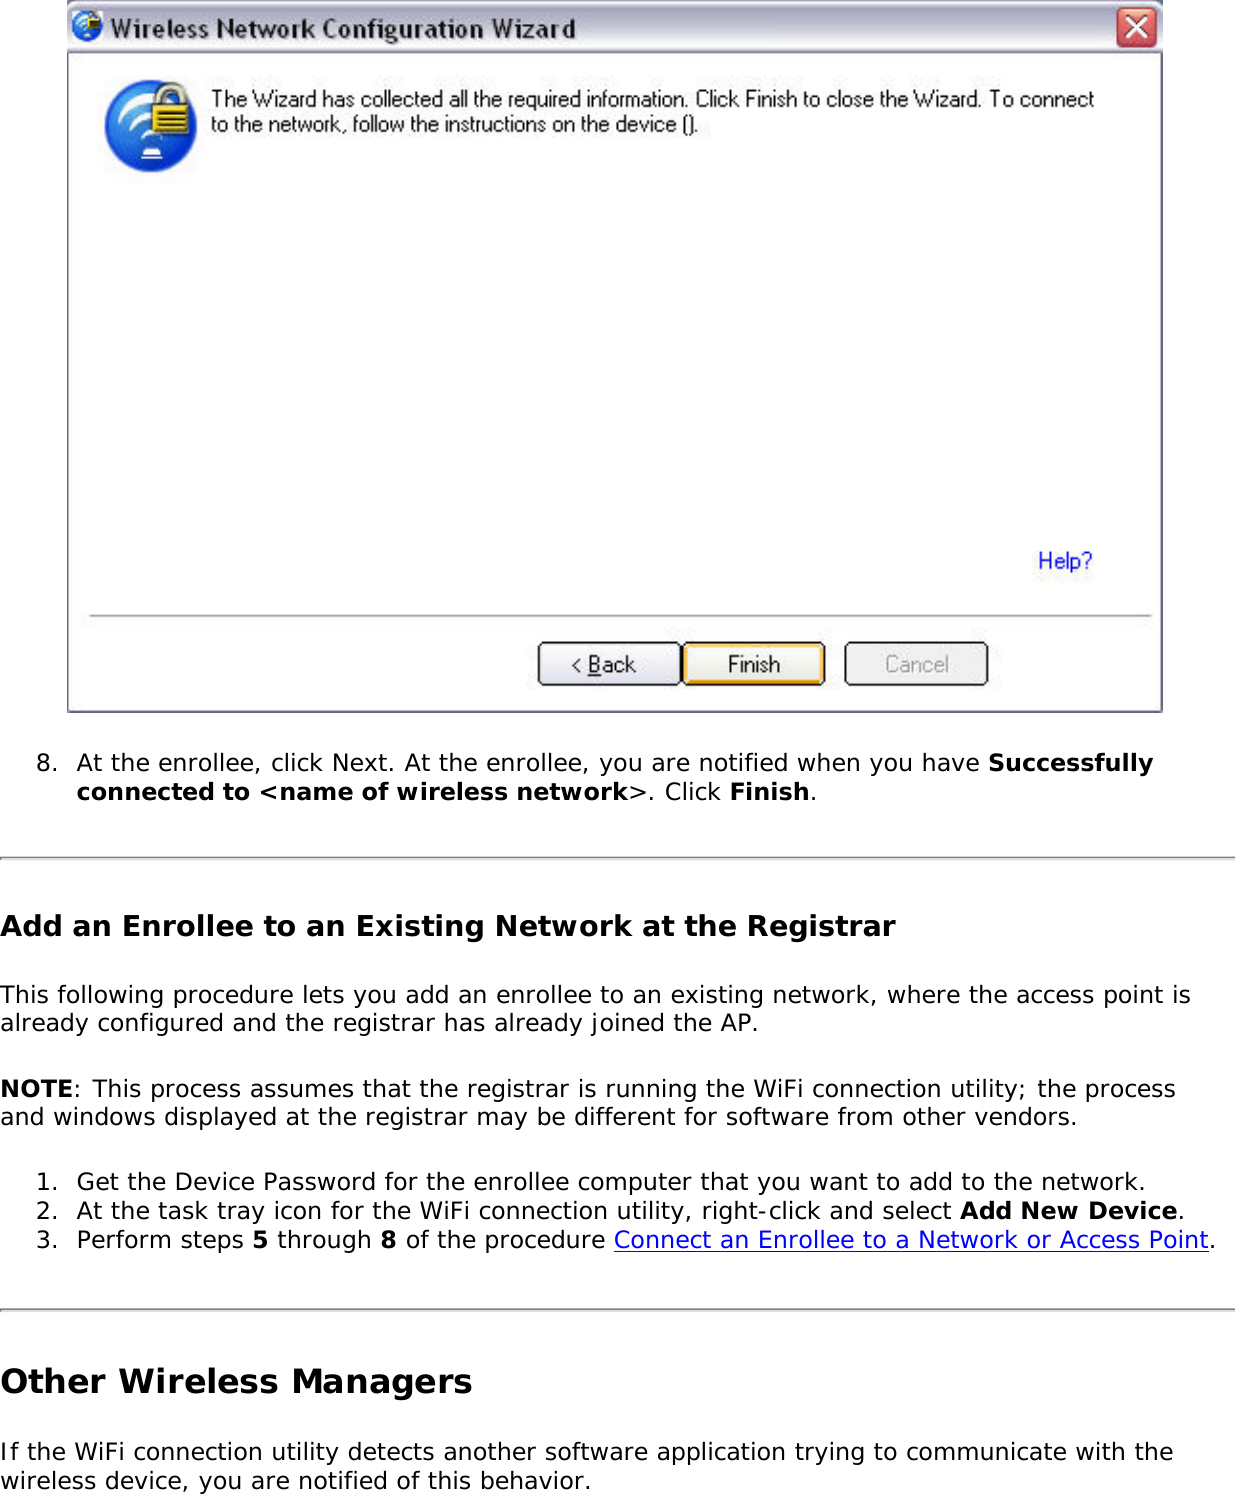 8.  At the enrollee, click Next. At the enrollee, you are notified when you have Successfully connected to &lt;name of wireless network&gt;. Click Finish. Add an Enrollee to an Existing Network at the RegistrarThis following procedure lets you add an enrollee to an existing network, where the access point is already configured and the registrar has already joined the AP. NOTE: This process assumes that the registrar is running the WiFi connection utility; the process and windows displayed at the registrar may be different for software from other vendors. 1.  Get the Device Password for the enrollee computer that you want to add to the network. 2.  At the task tray icon for the WiFi connection utility, right-click and select Add New Device. 3.  Perform steps 5 through 8 of the procedure Connect an Enrollee to a Network or Access Point. Other Wireless ManagersIf the WiFi connection utility detects another software application trying to communicate with the wireless device, you are notified of this behavior. 